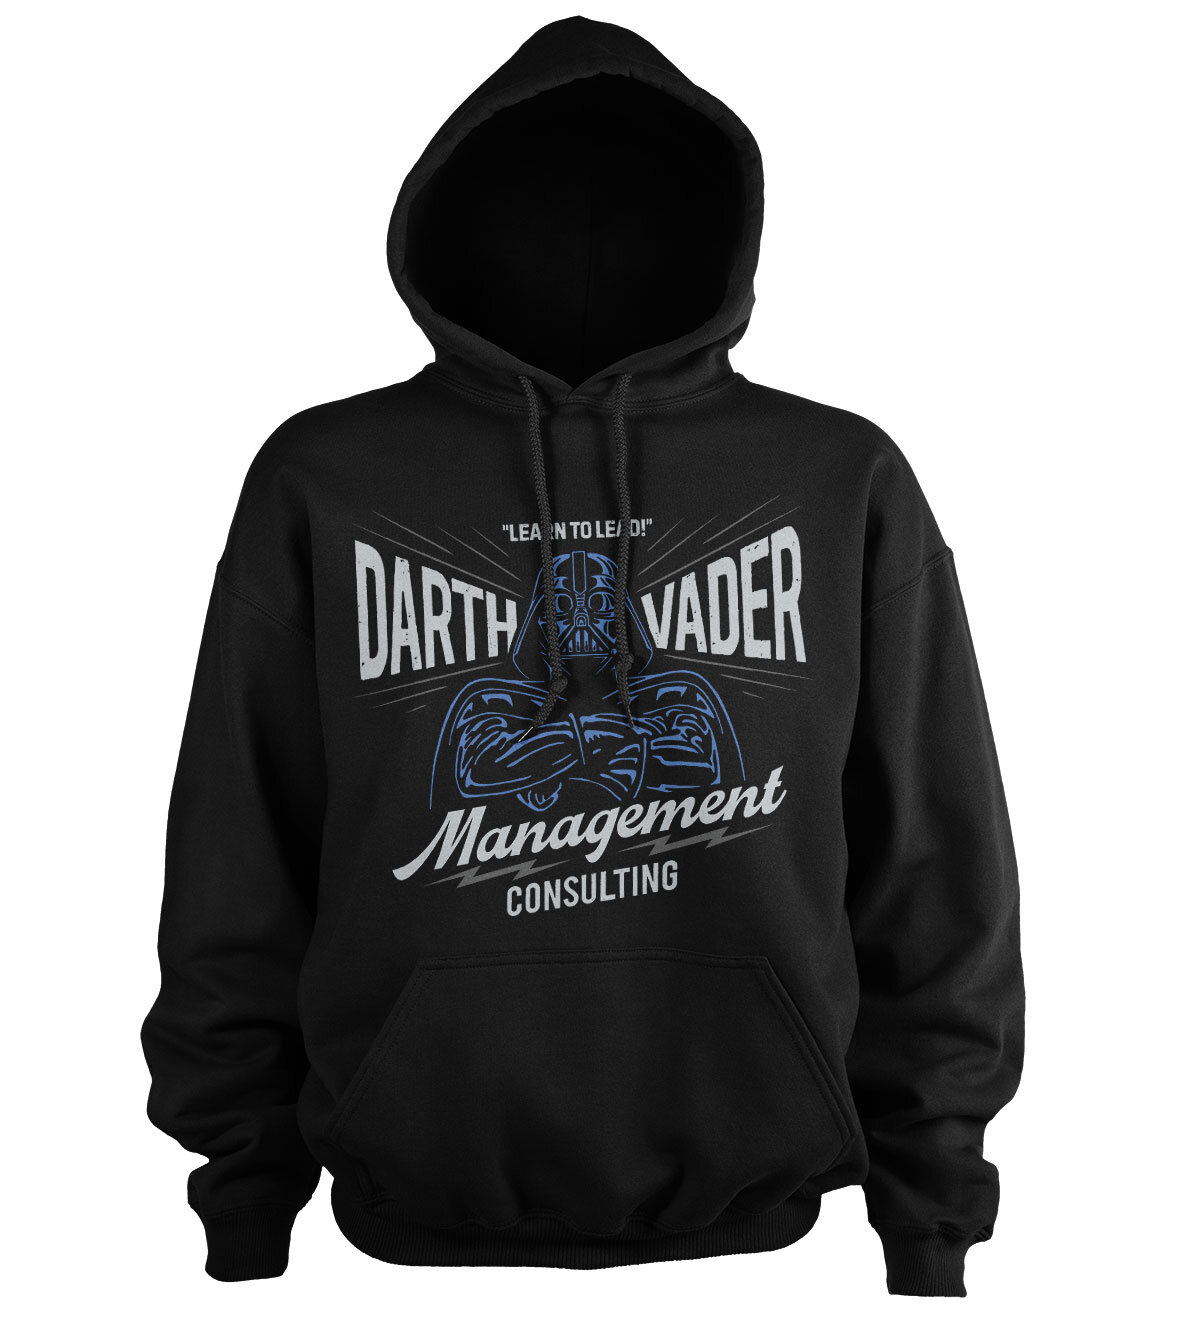 Darth Vader Management Consulting Hoodie